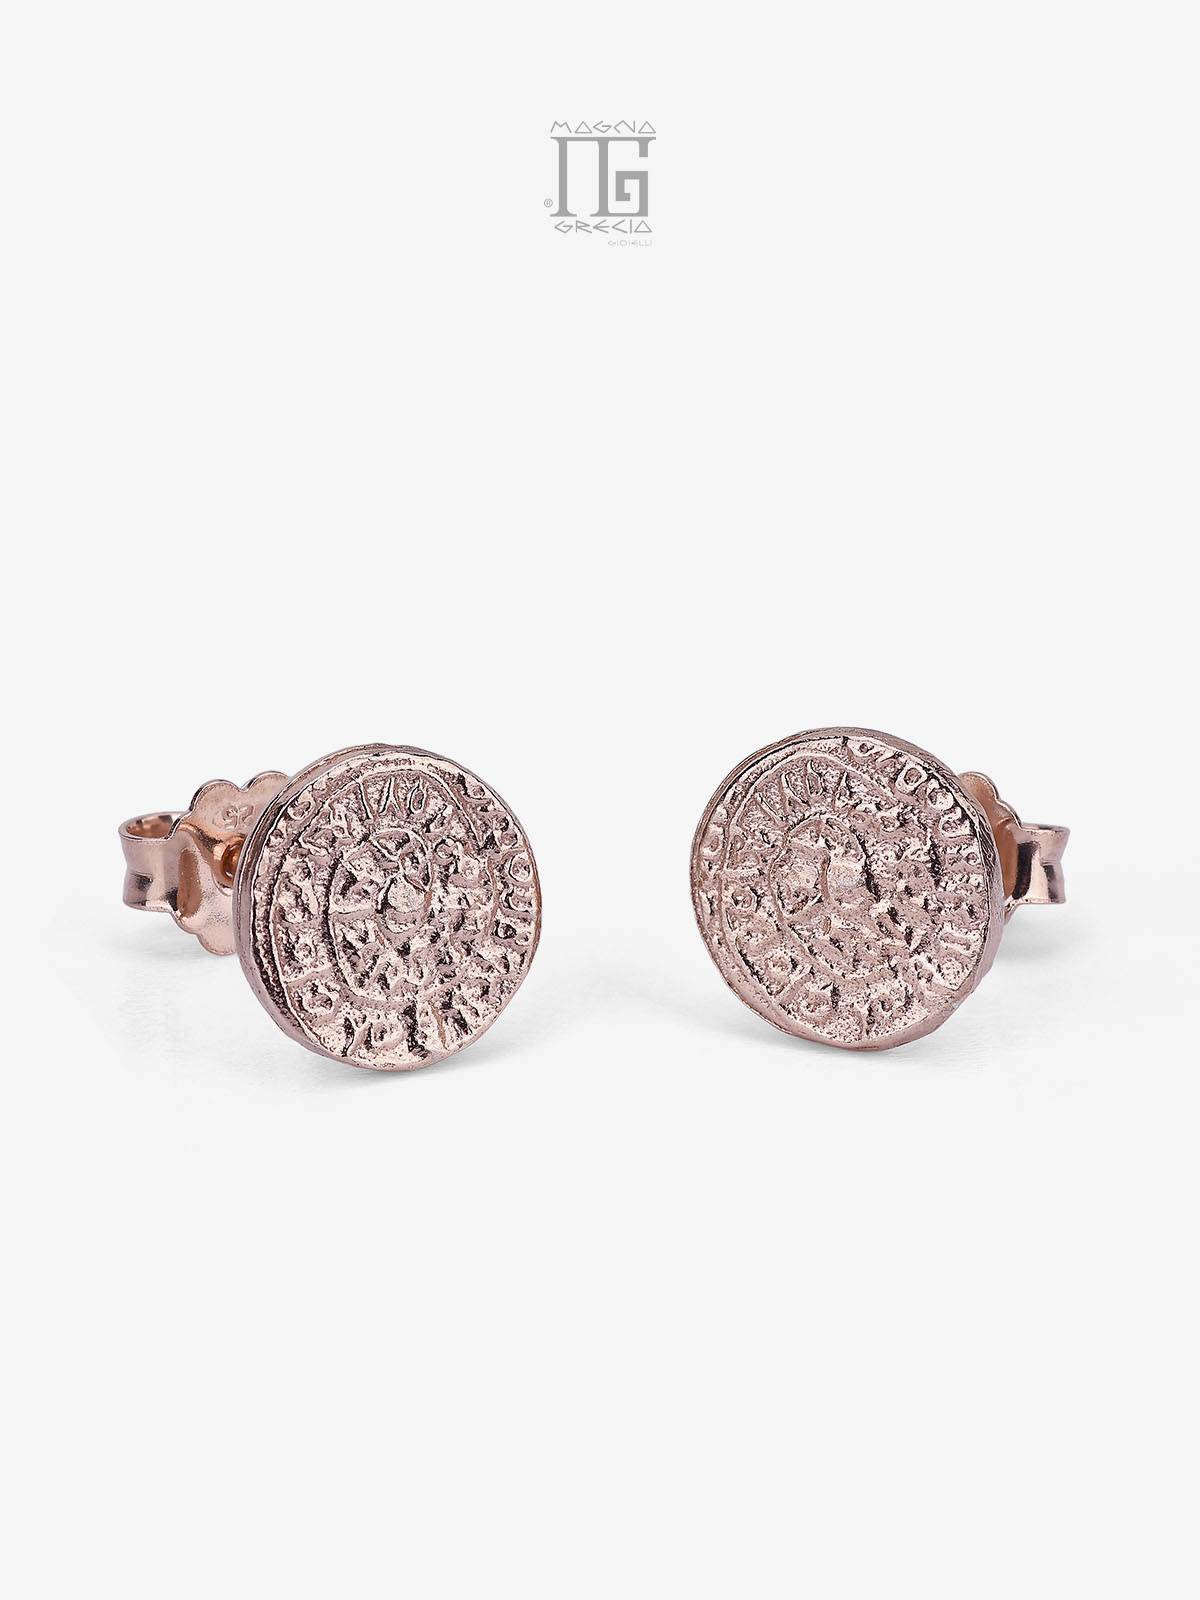 Silver earrings with Phaistos Disc coin Code MGK 4249 V